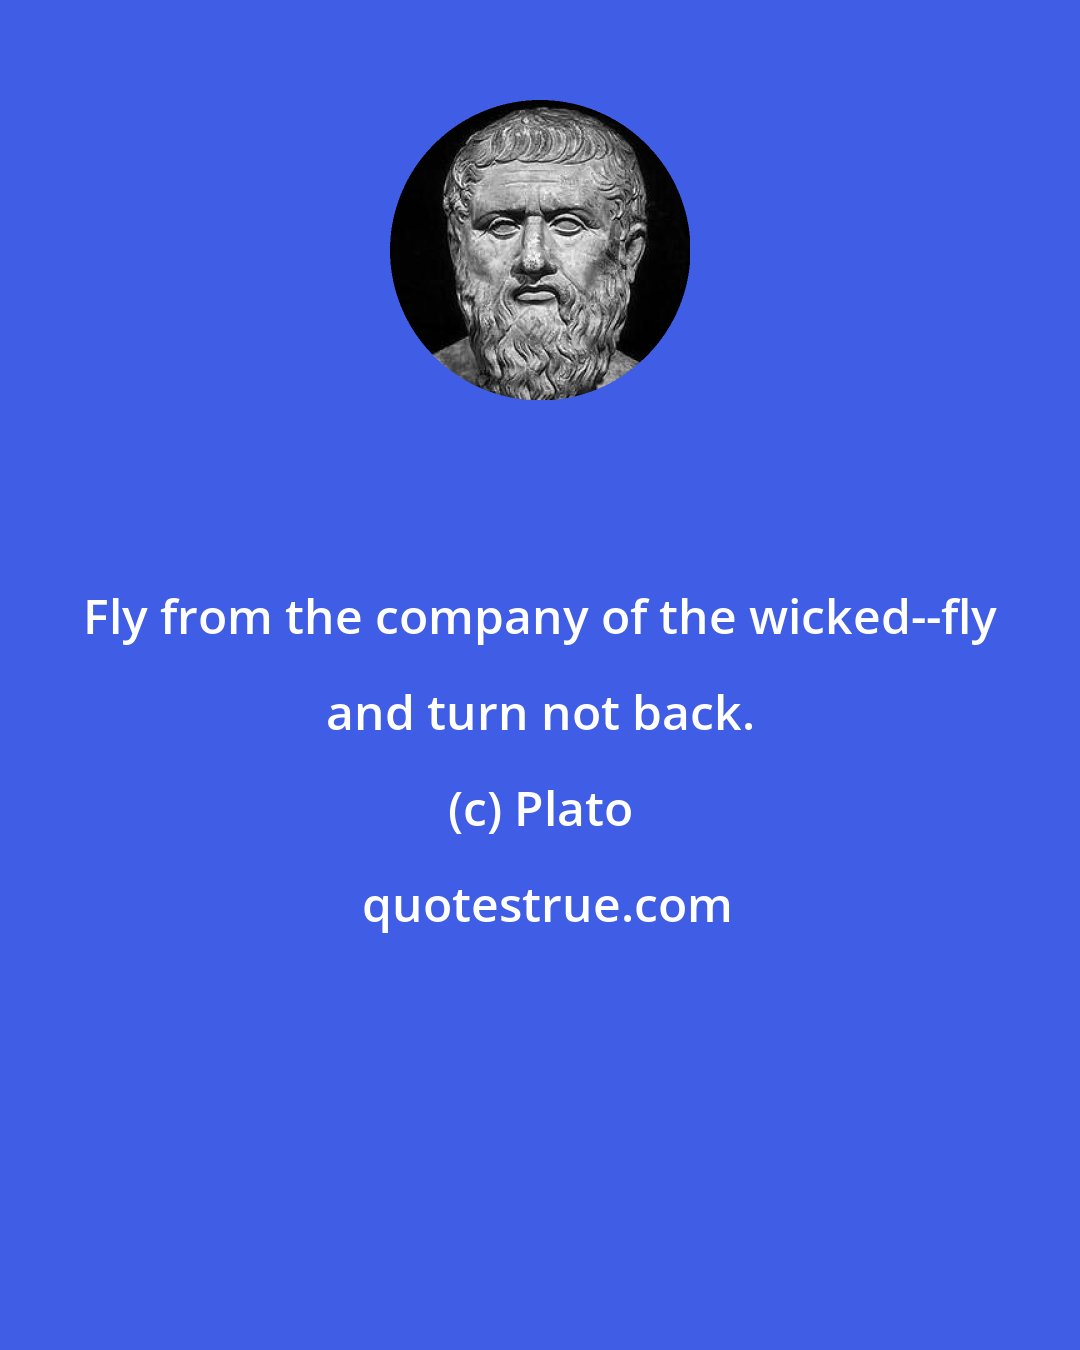 Plato: Fly from the company of the wicked--fly and turn not back.